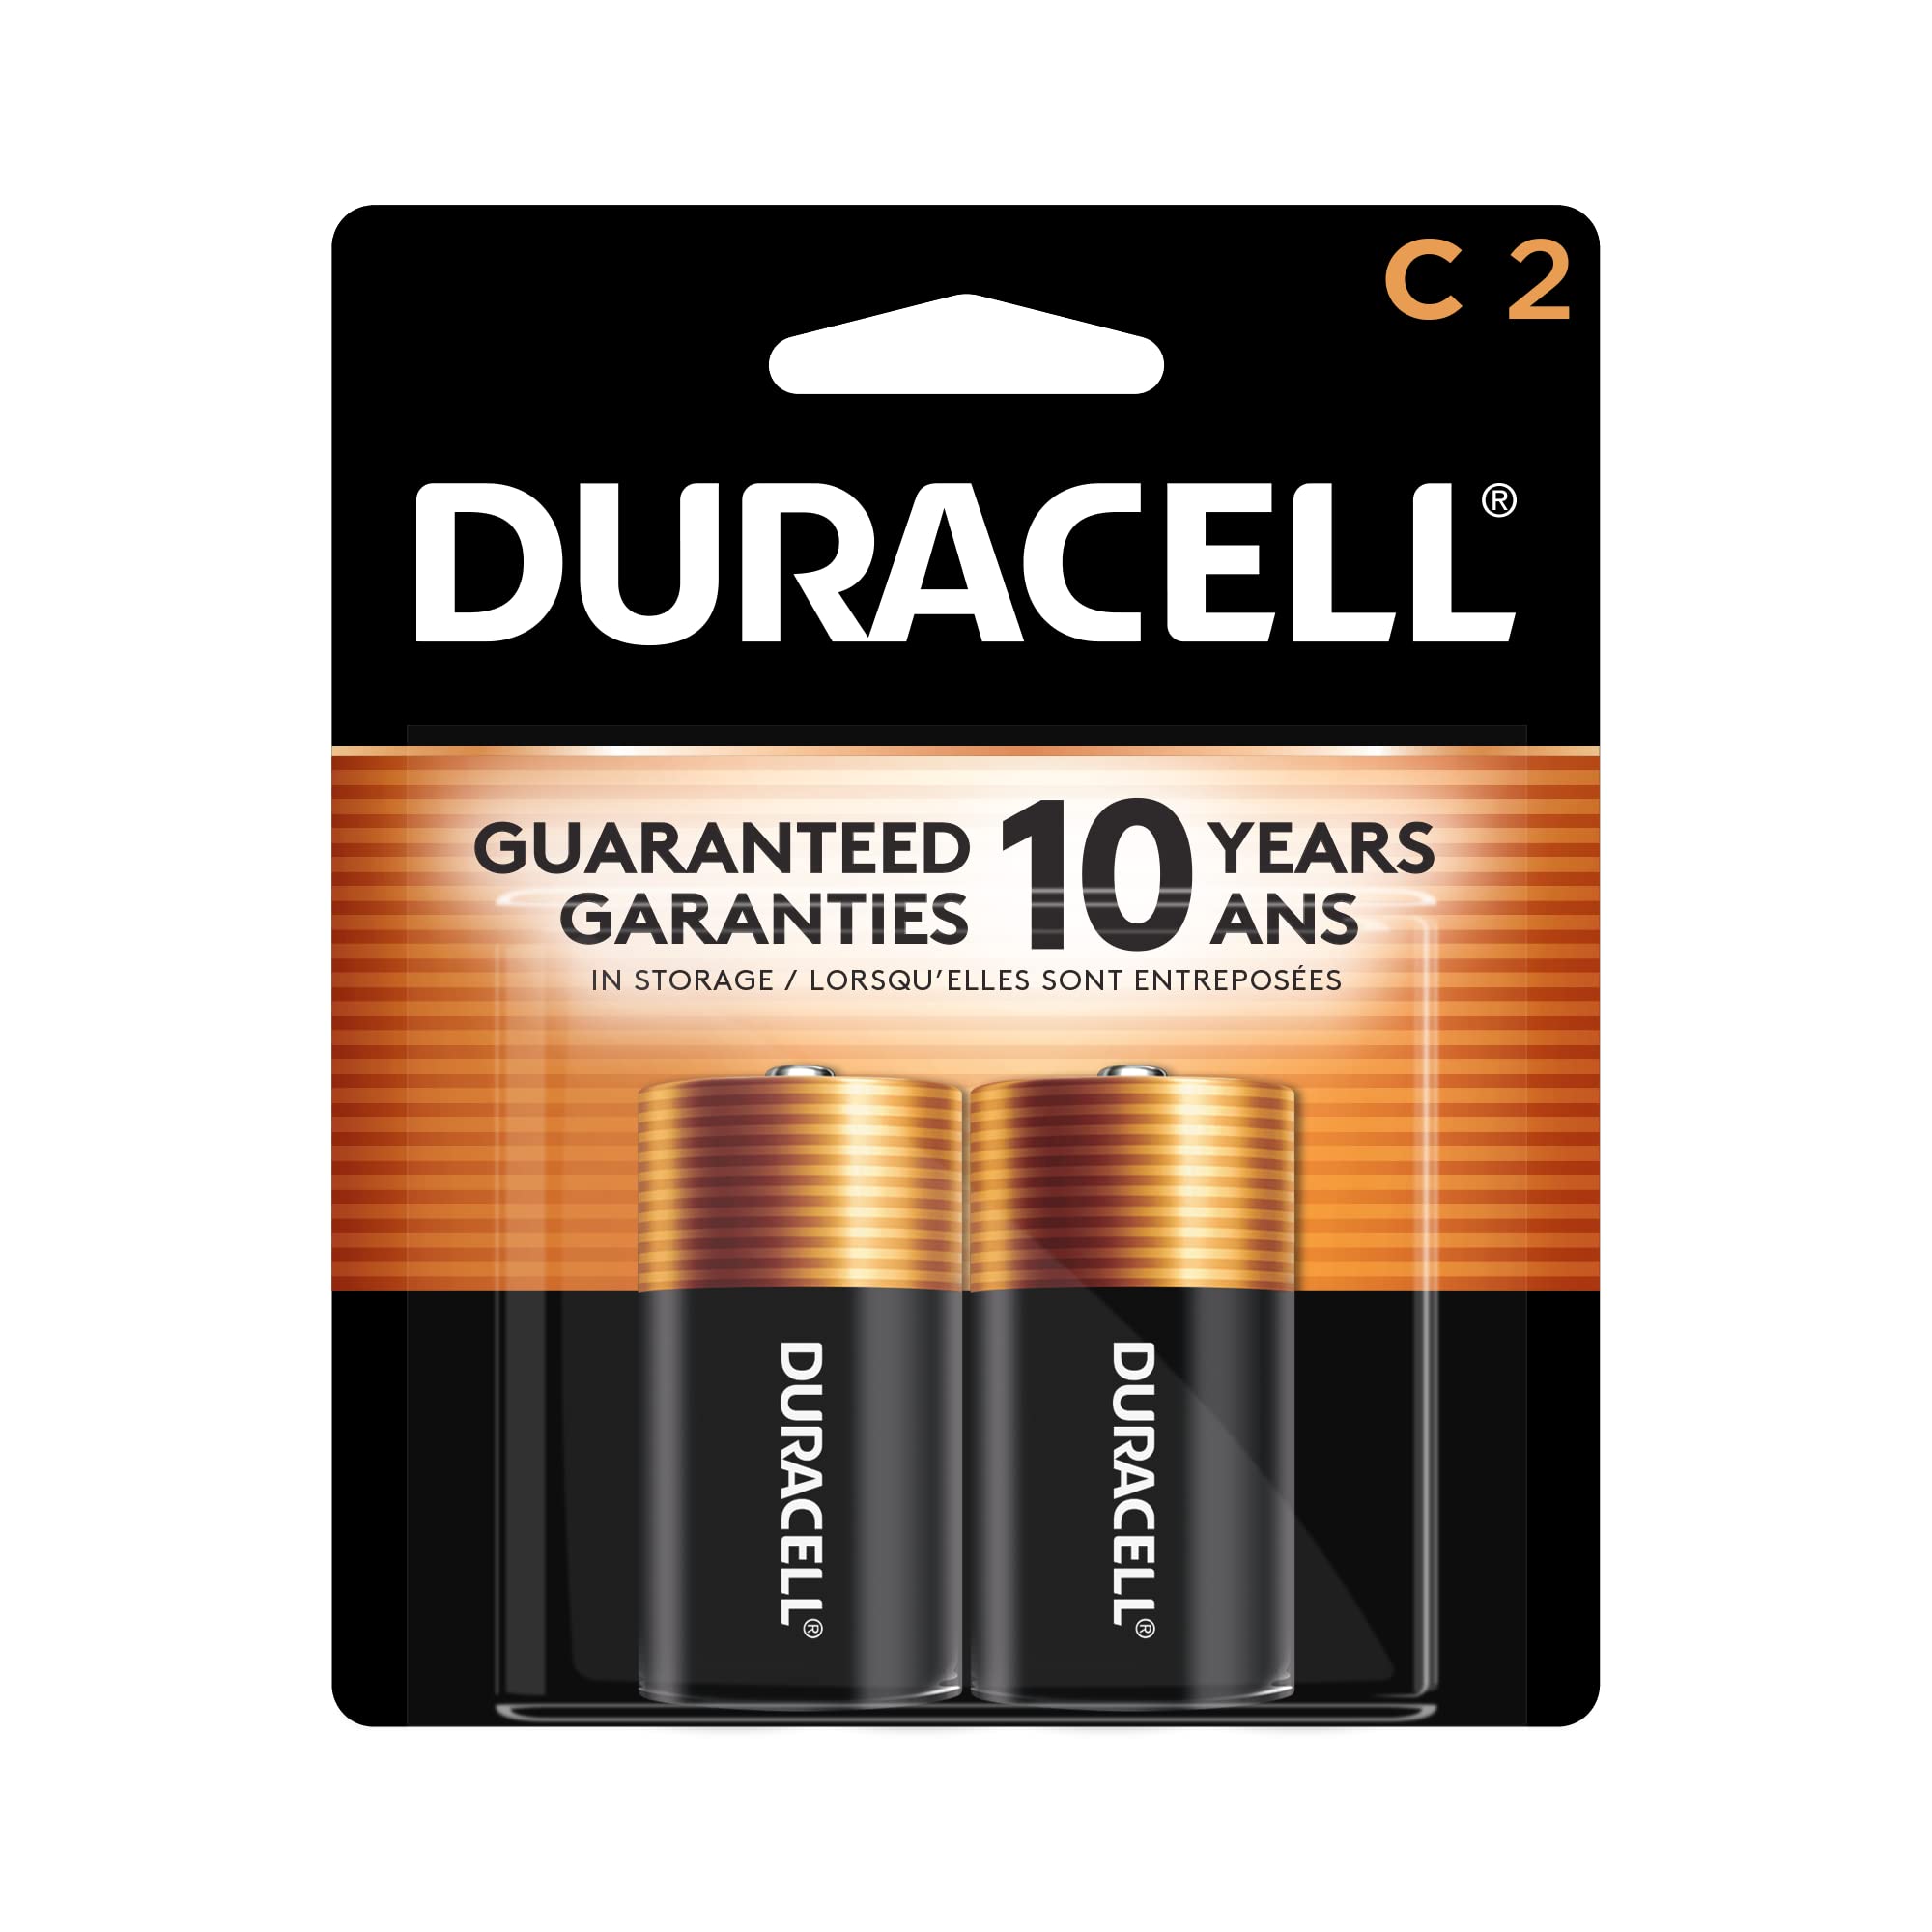 DURACELL Coppertop 1.5V Size C Alkaline Battery, (Pack of 20) - image 1 of 5